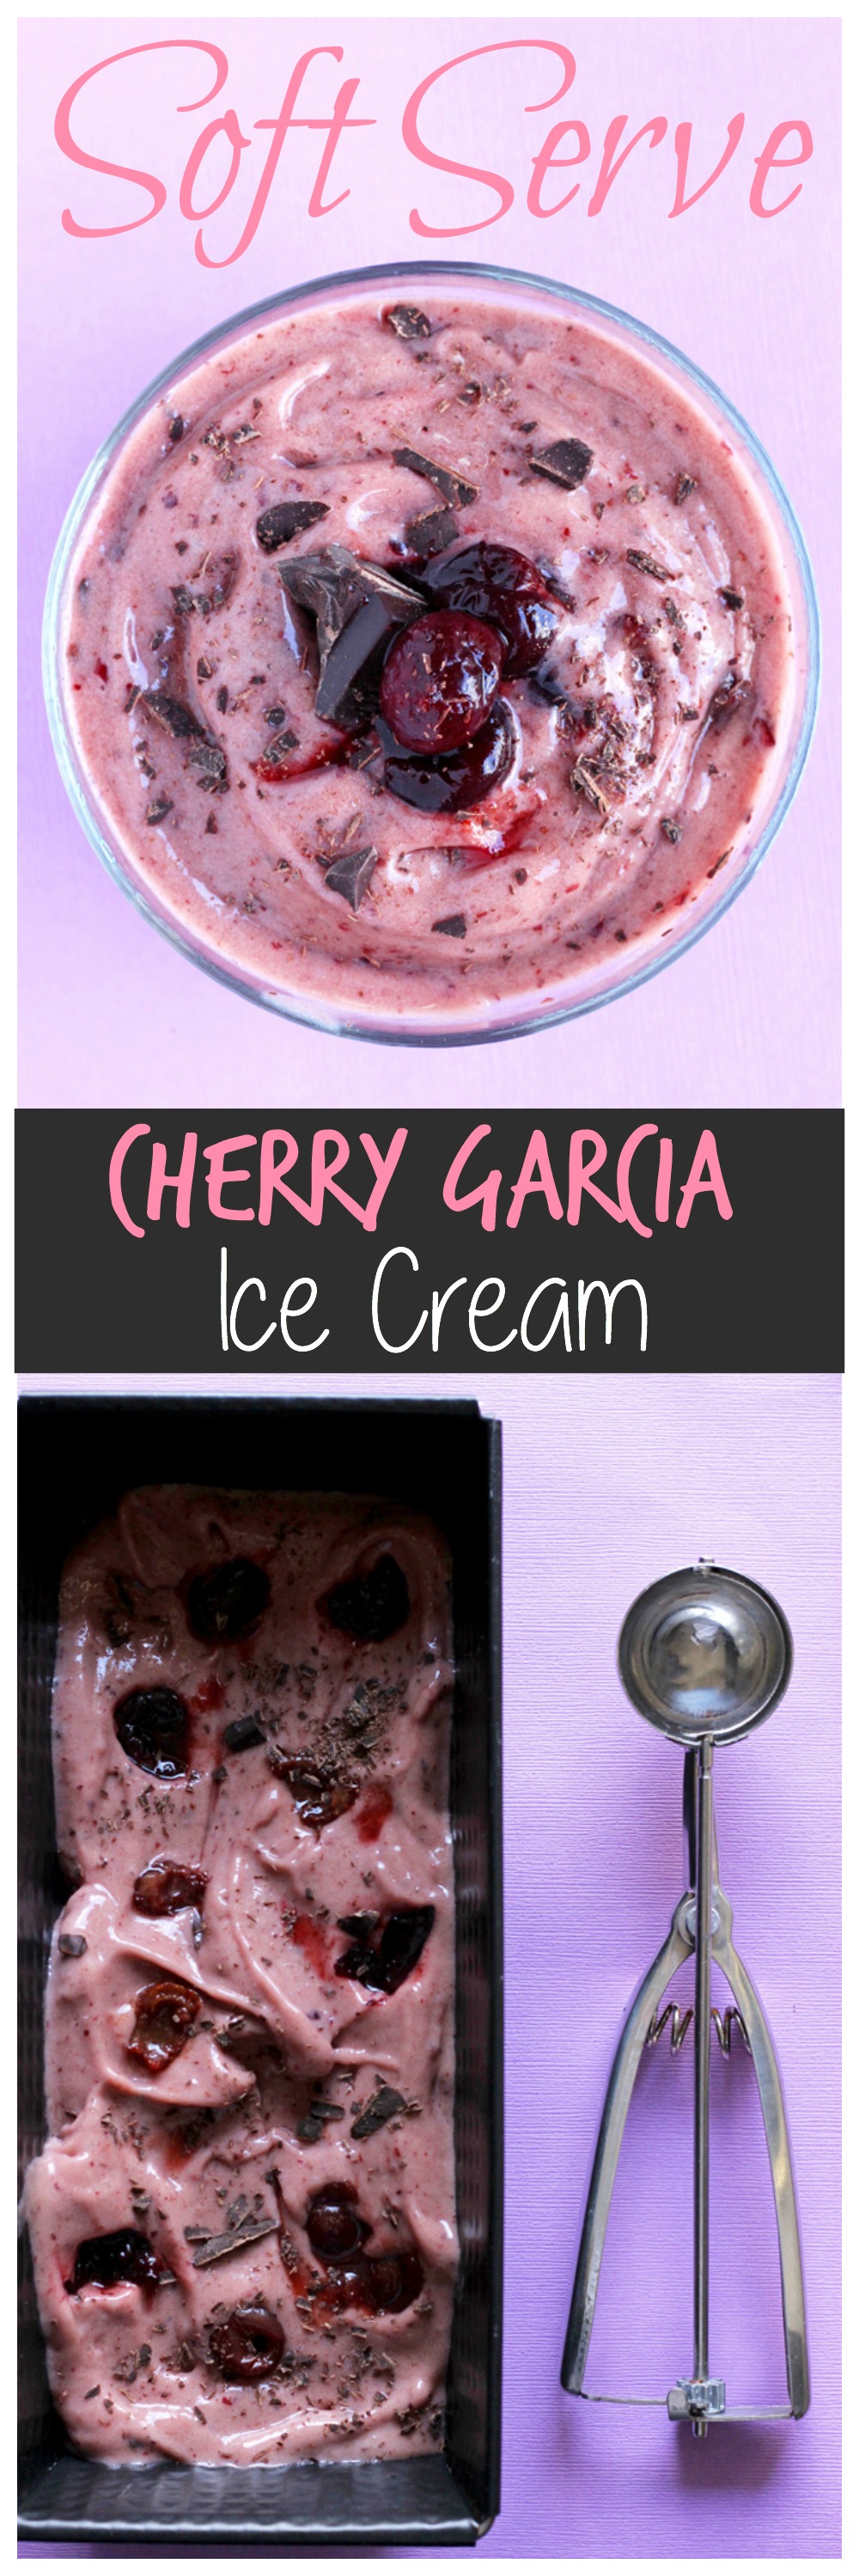 Cherry Garcia Soft Serve Ice Cream -Enjoy this guilt free, dairy-free, gluten-free, refined sugar free treat that is super delicious, healthy, and so easy to make! NeuroticMommy.com #vegan #healthy #raw